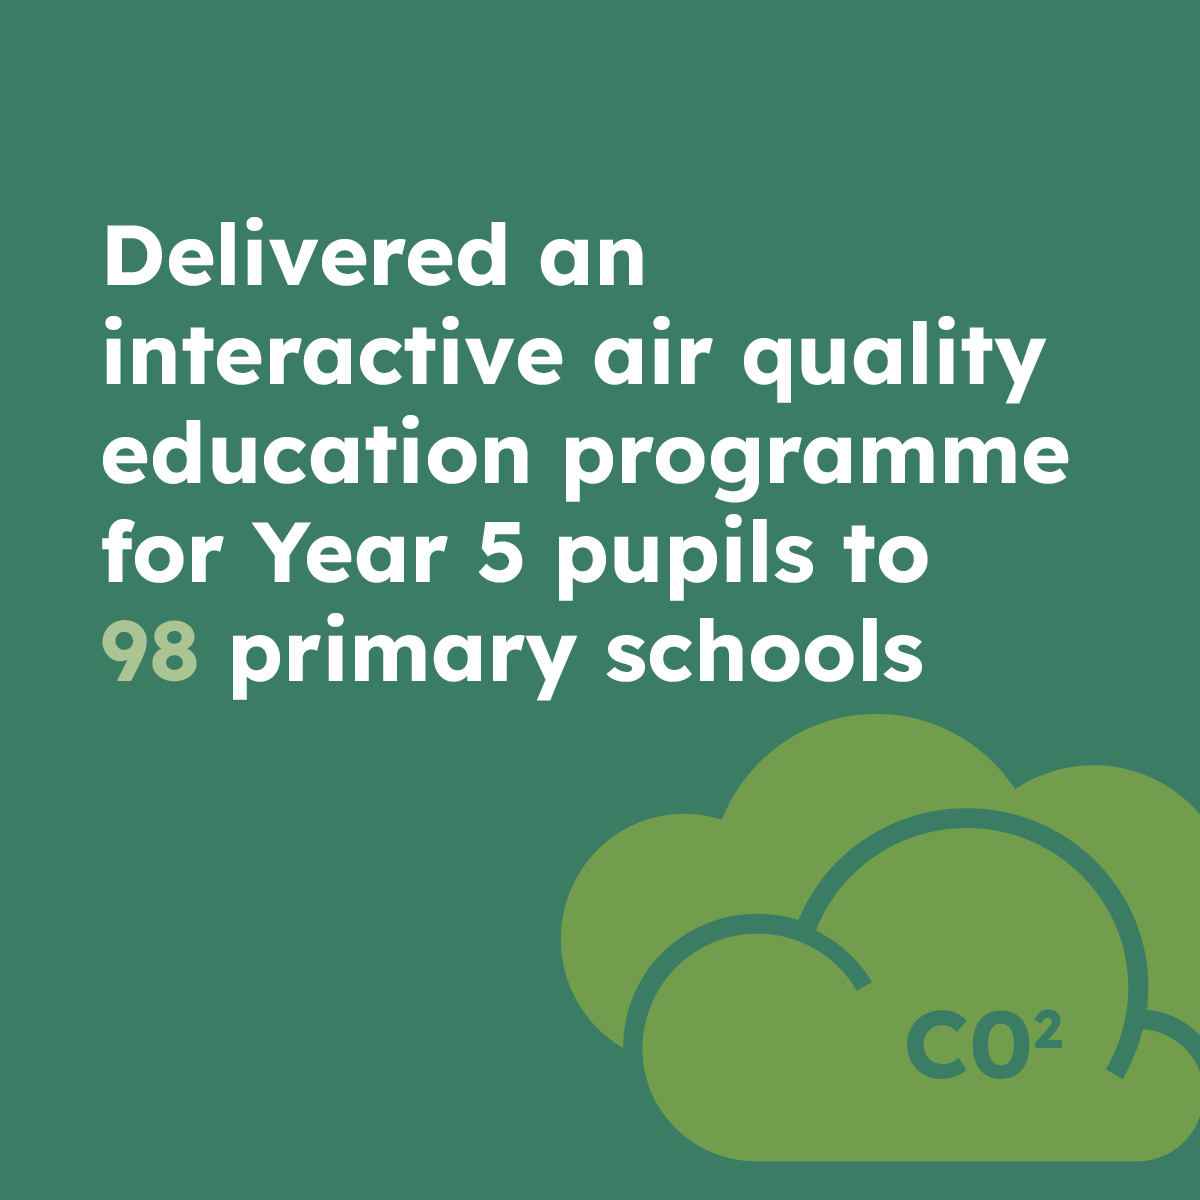 Delivered an interactive air quality education programme for Year 5 pupils to 98 primary schools